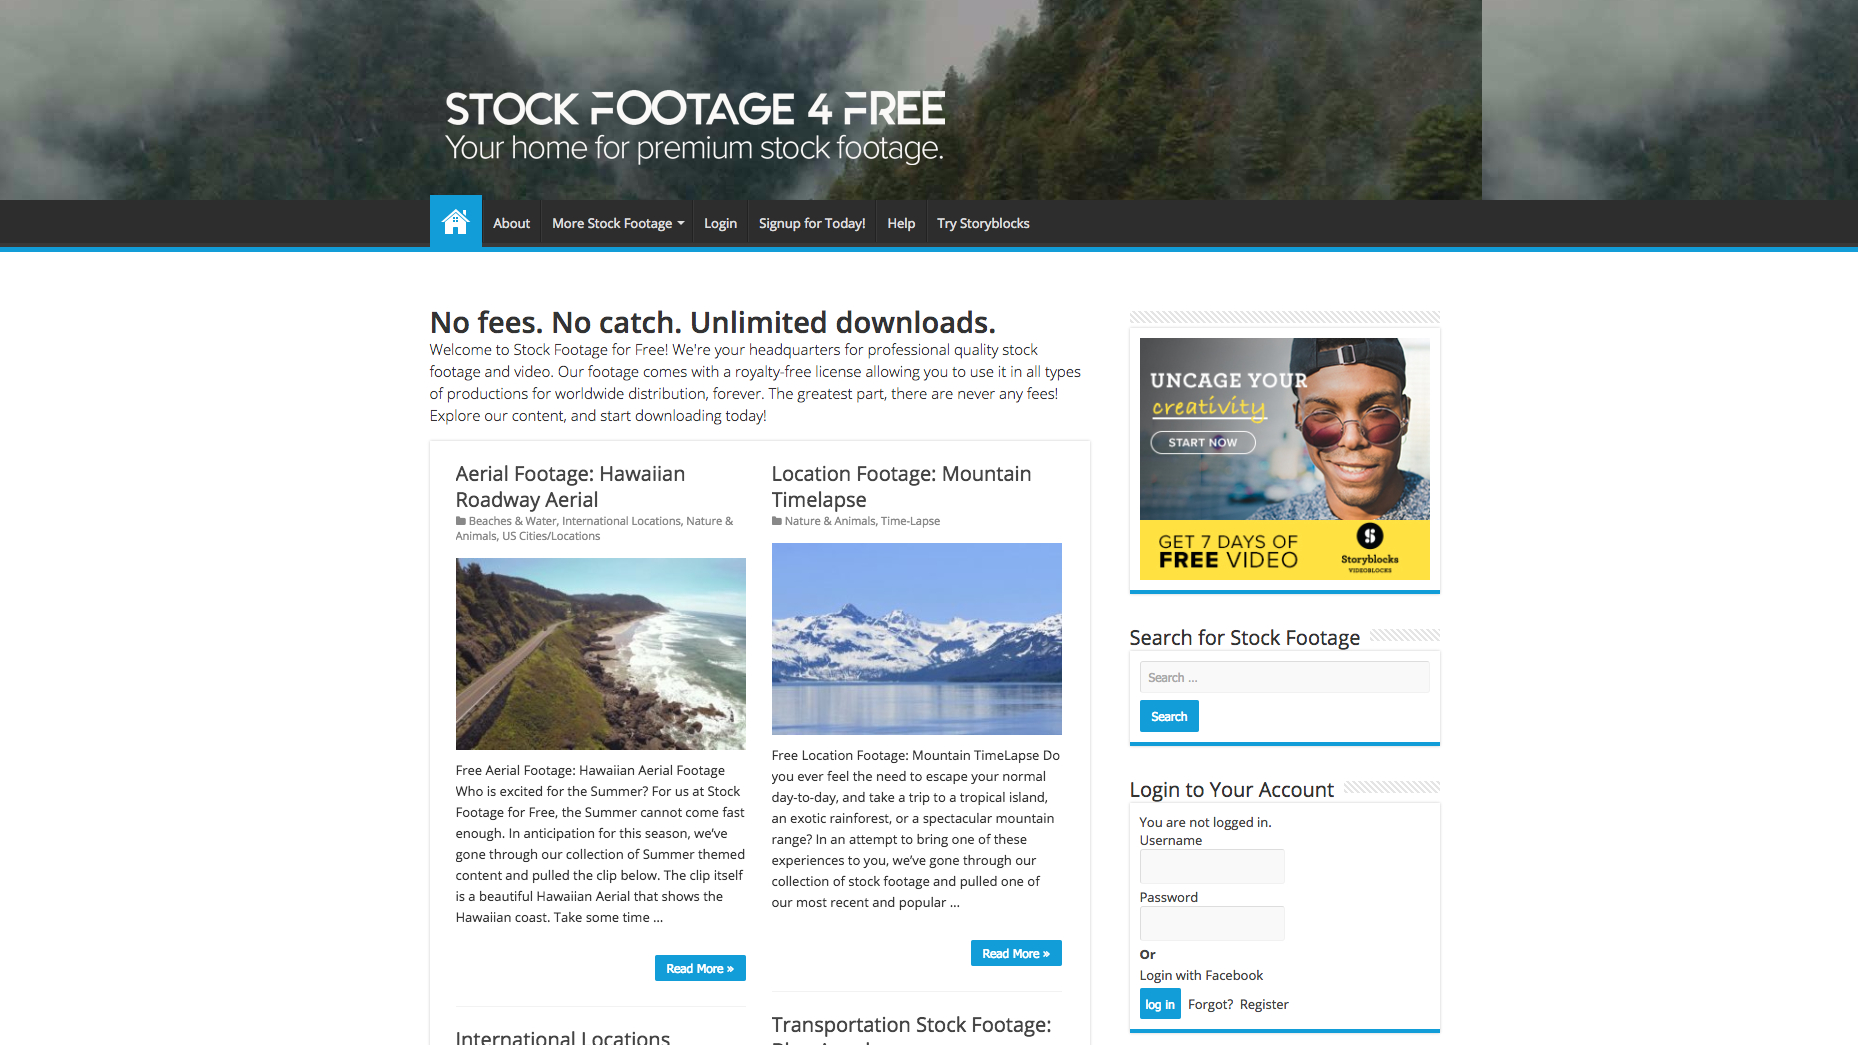 Stock Footage for Free screen grab